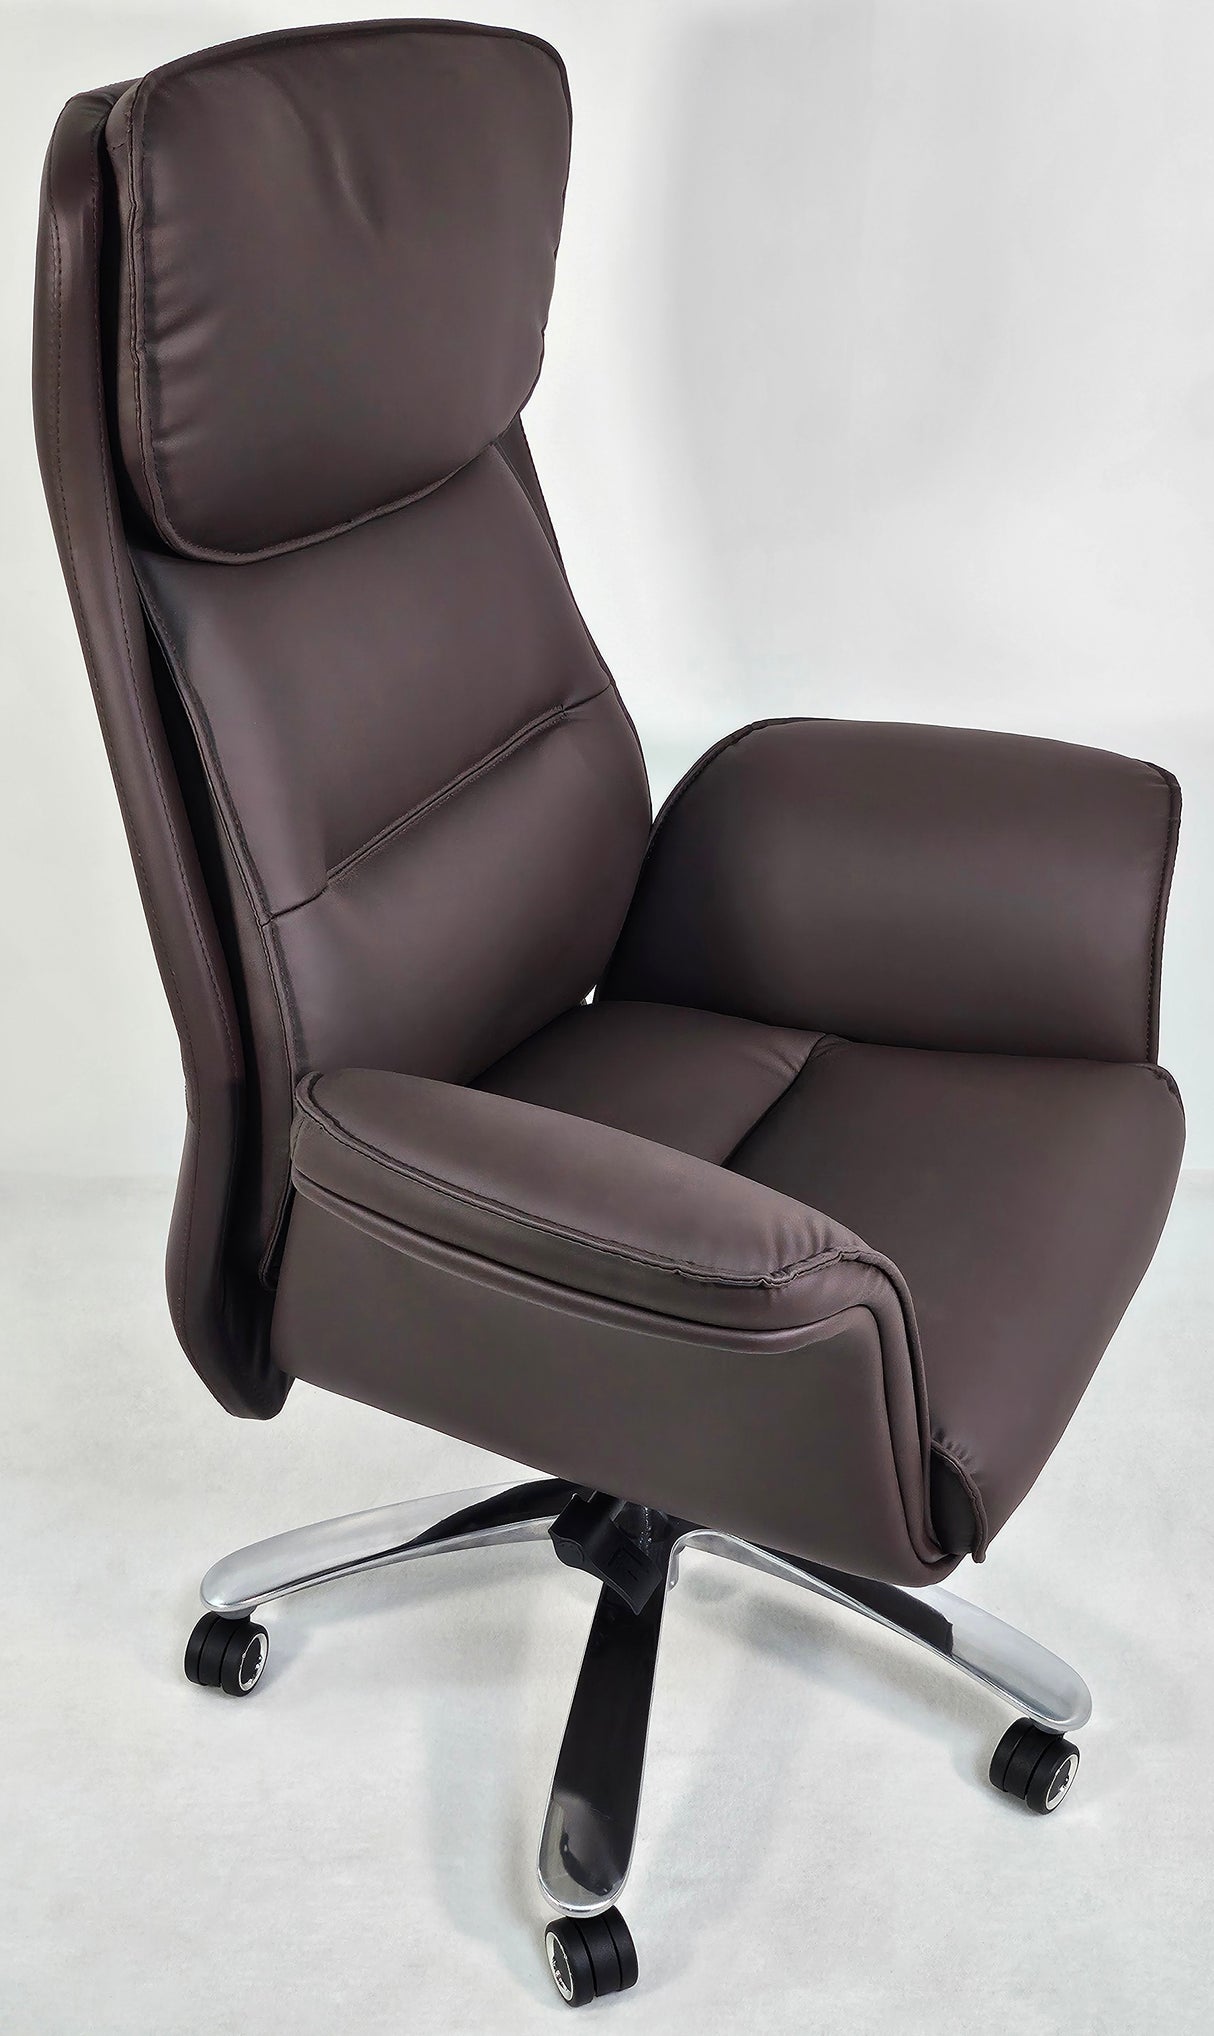 Modern High Back Brown Leather Executive Office Chair with Winged Arms - 1808A